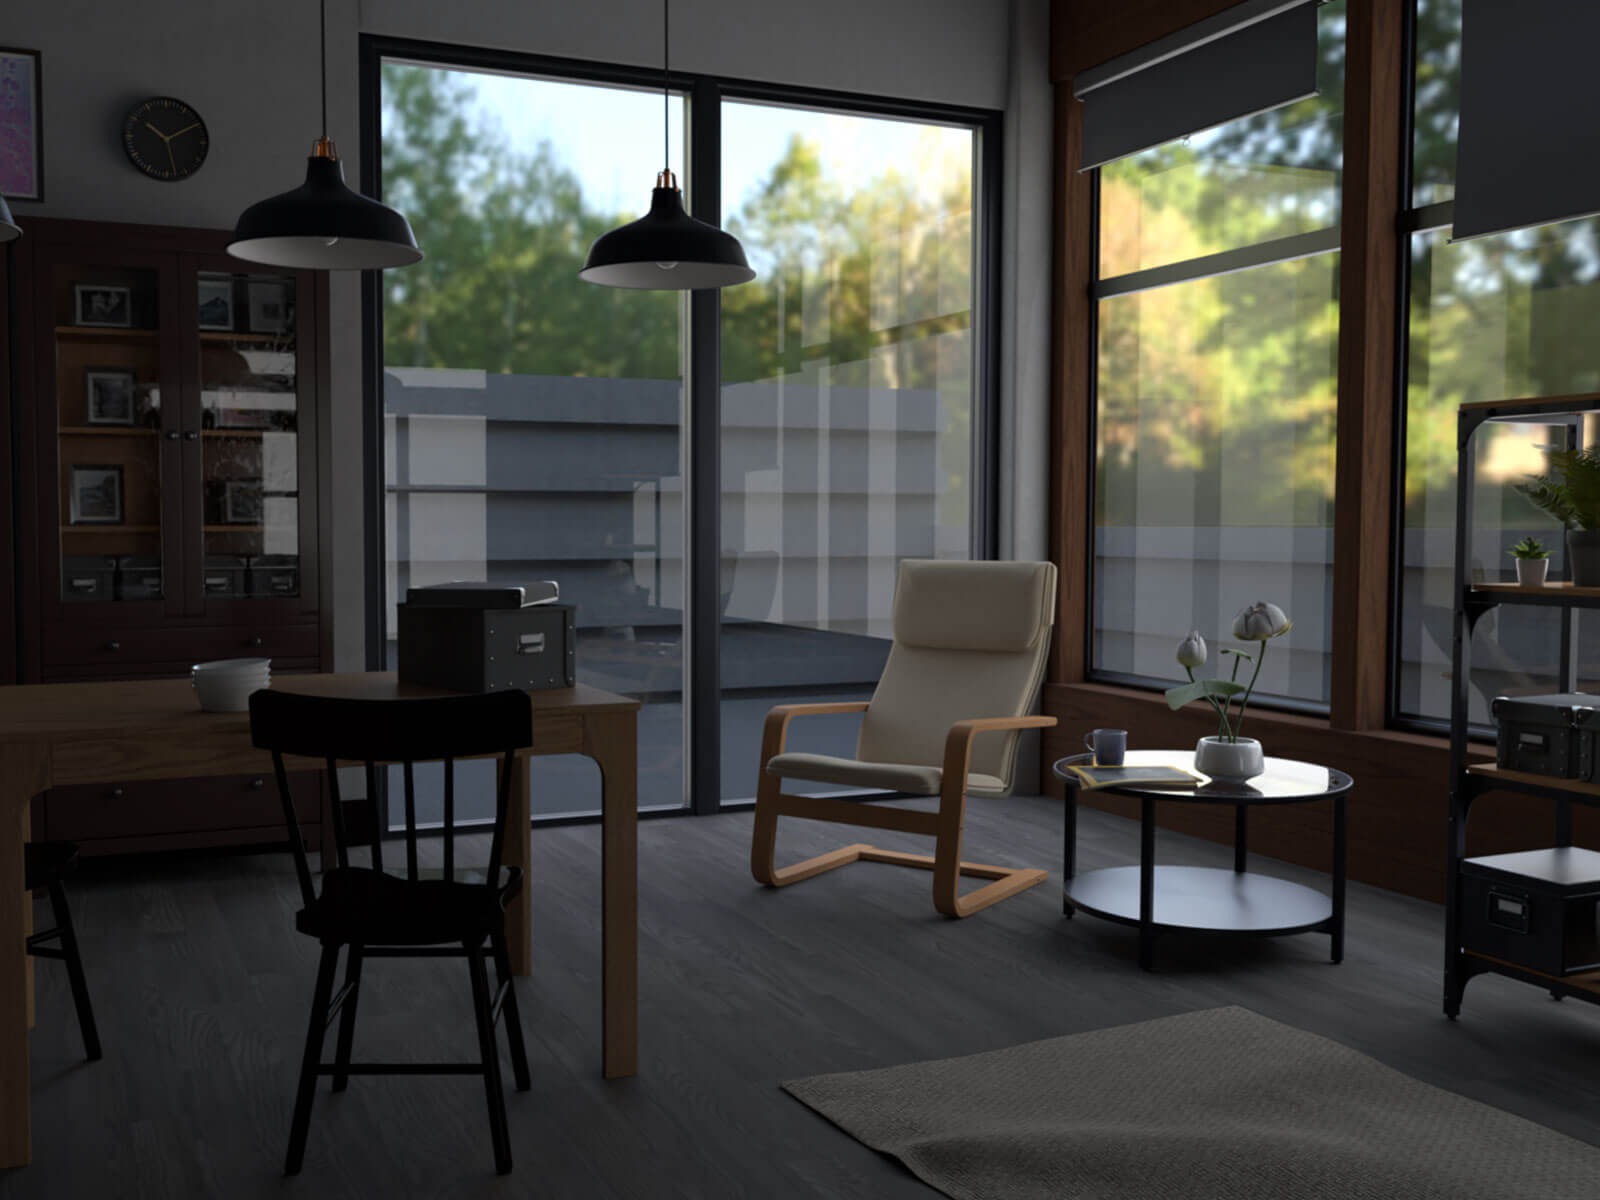 3D-modeled scene of a lounge looking out into a fenced yard.